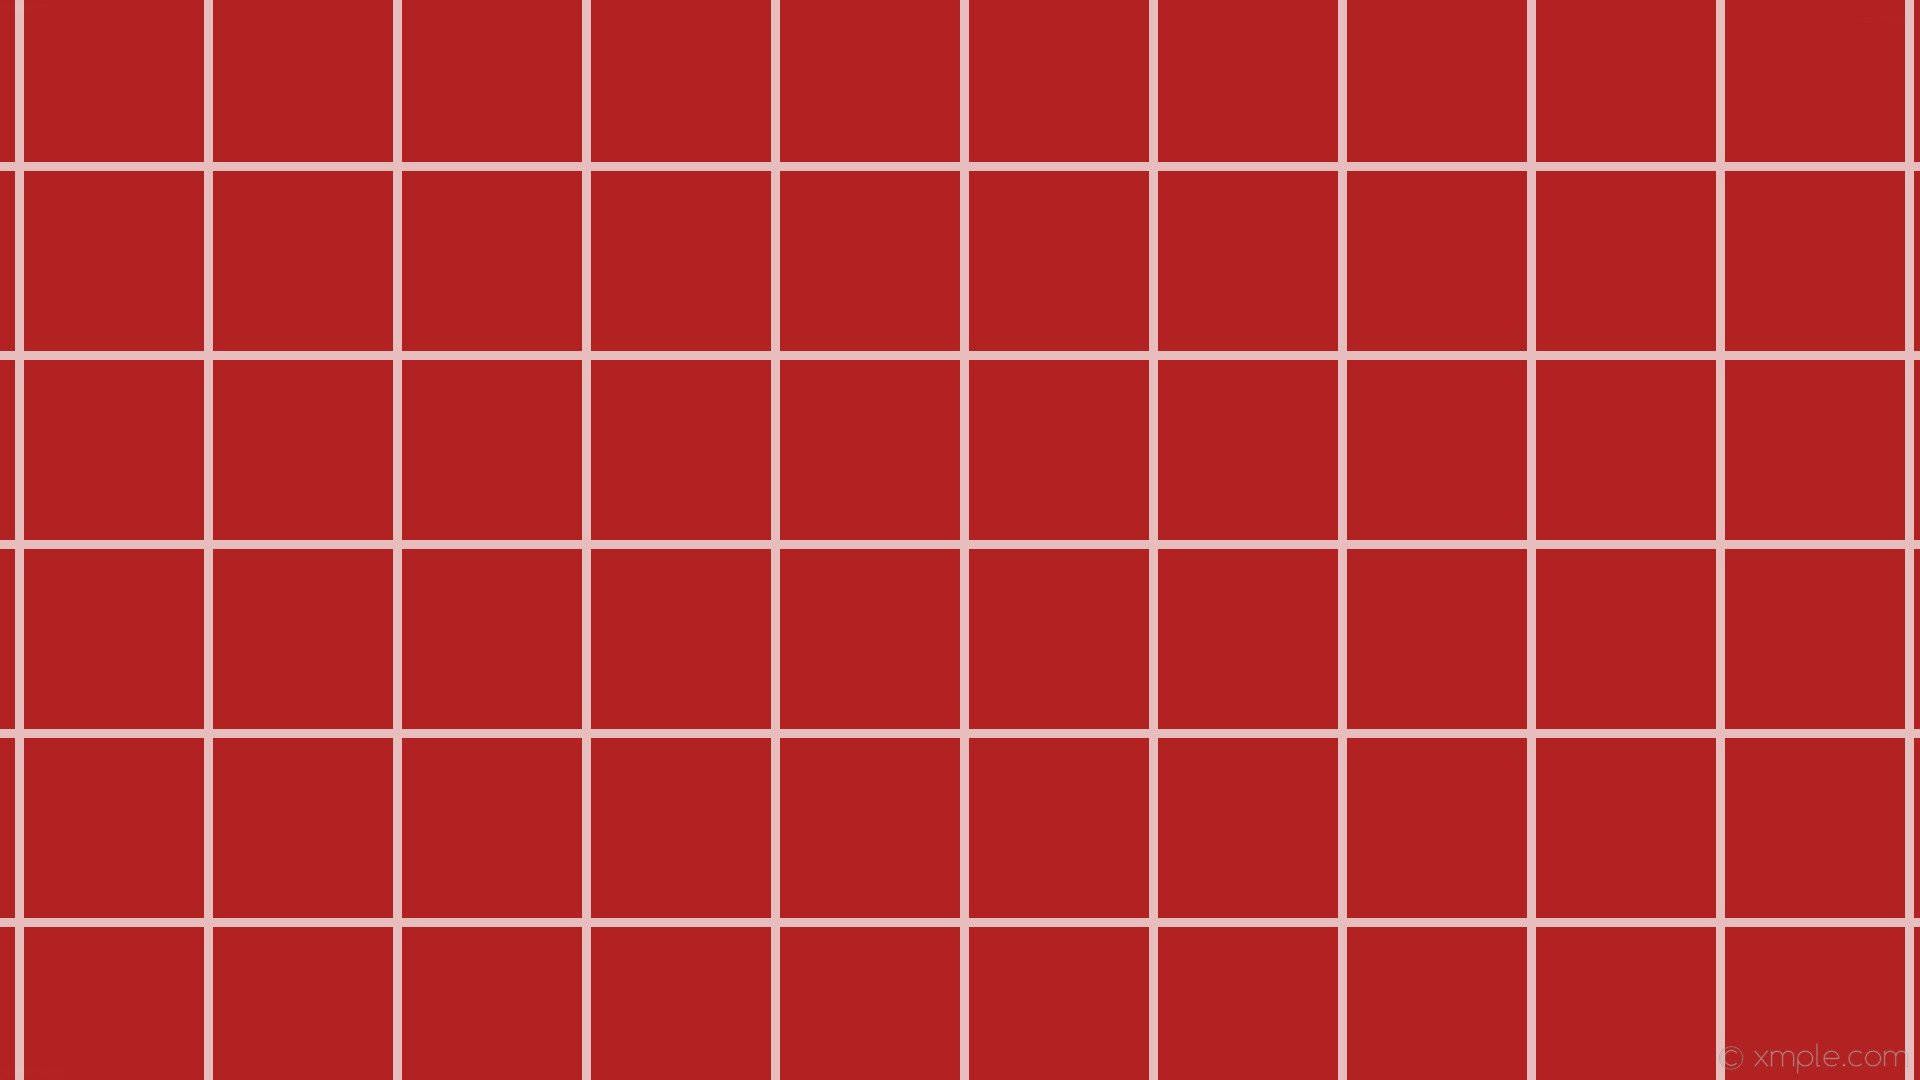 Red and white squares background - Grid